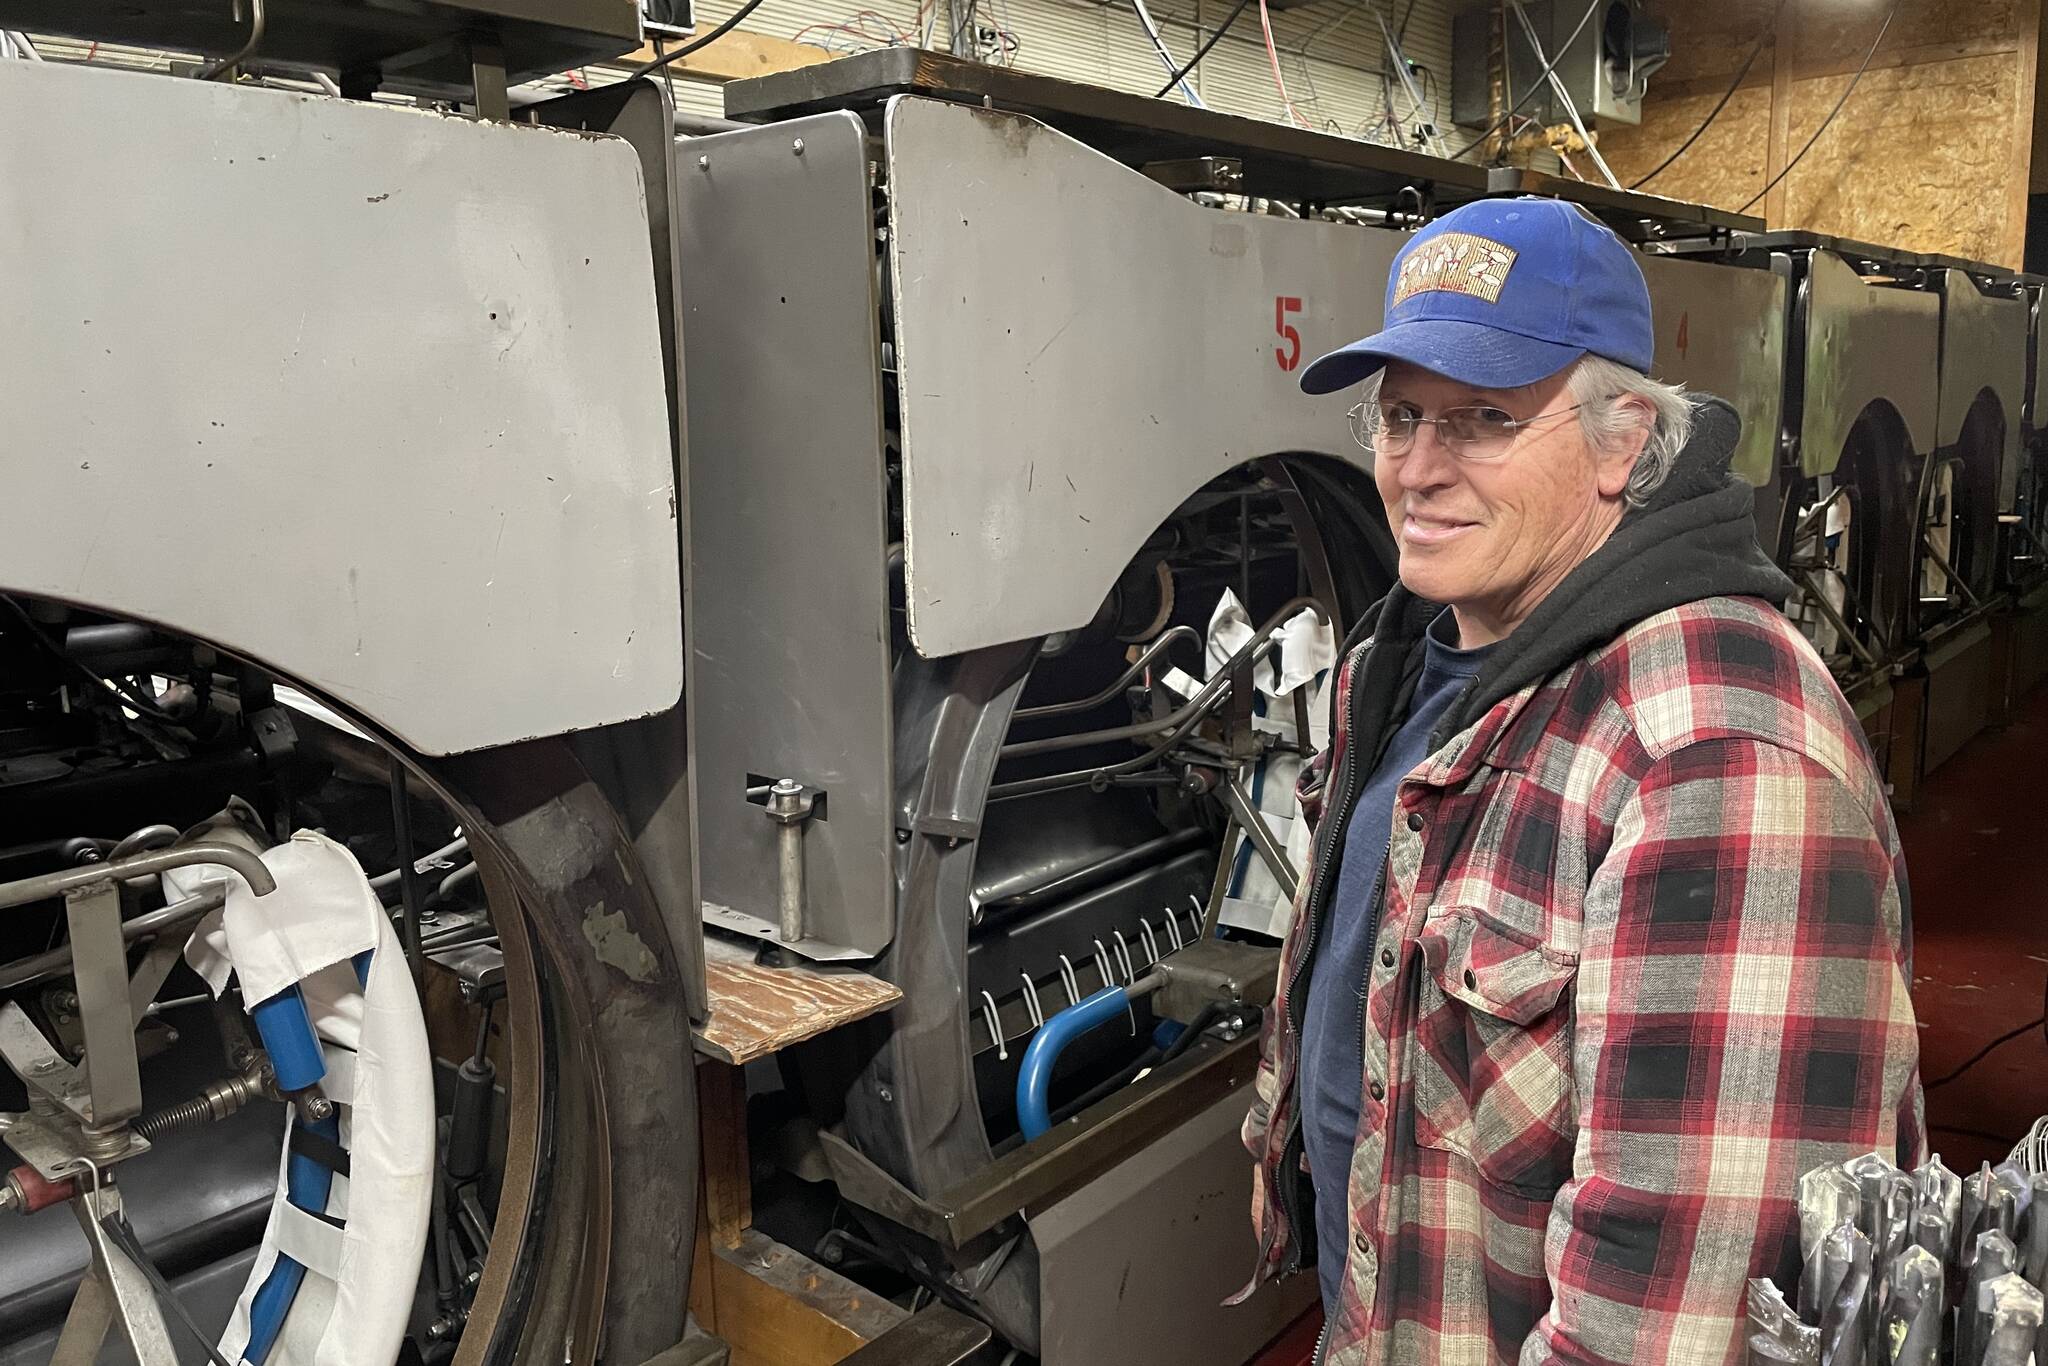 Bob Petersen, who took over Pinz several years ago, gestures at the machinery behind on the lanes on May 5, 2022. (Michael S. Lockett / Juneau Empire)